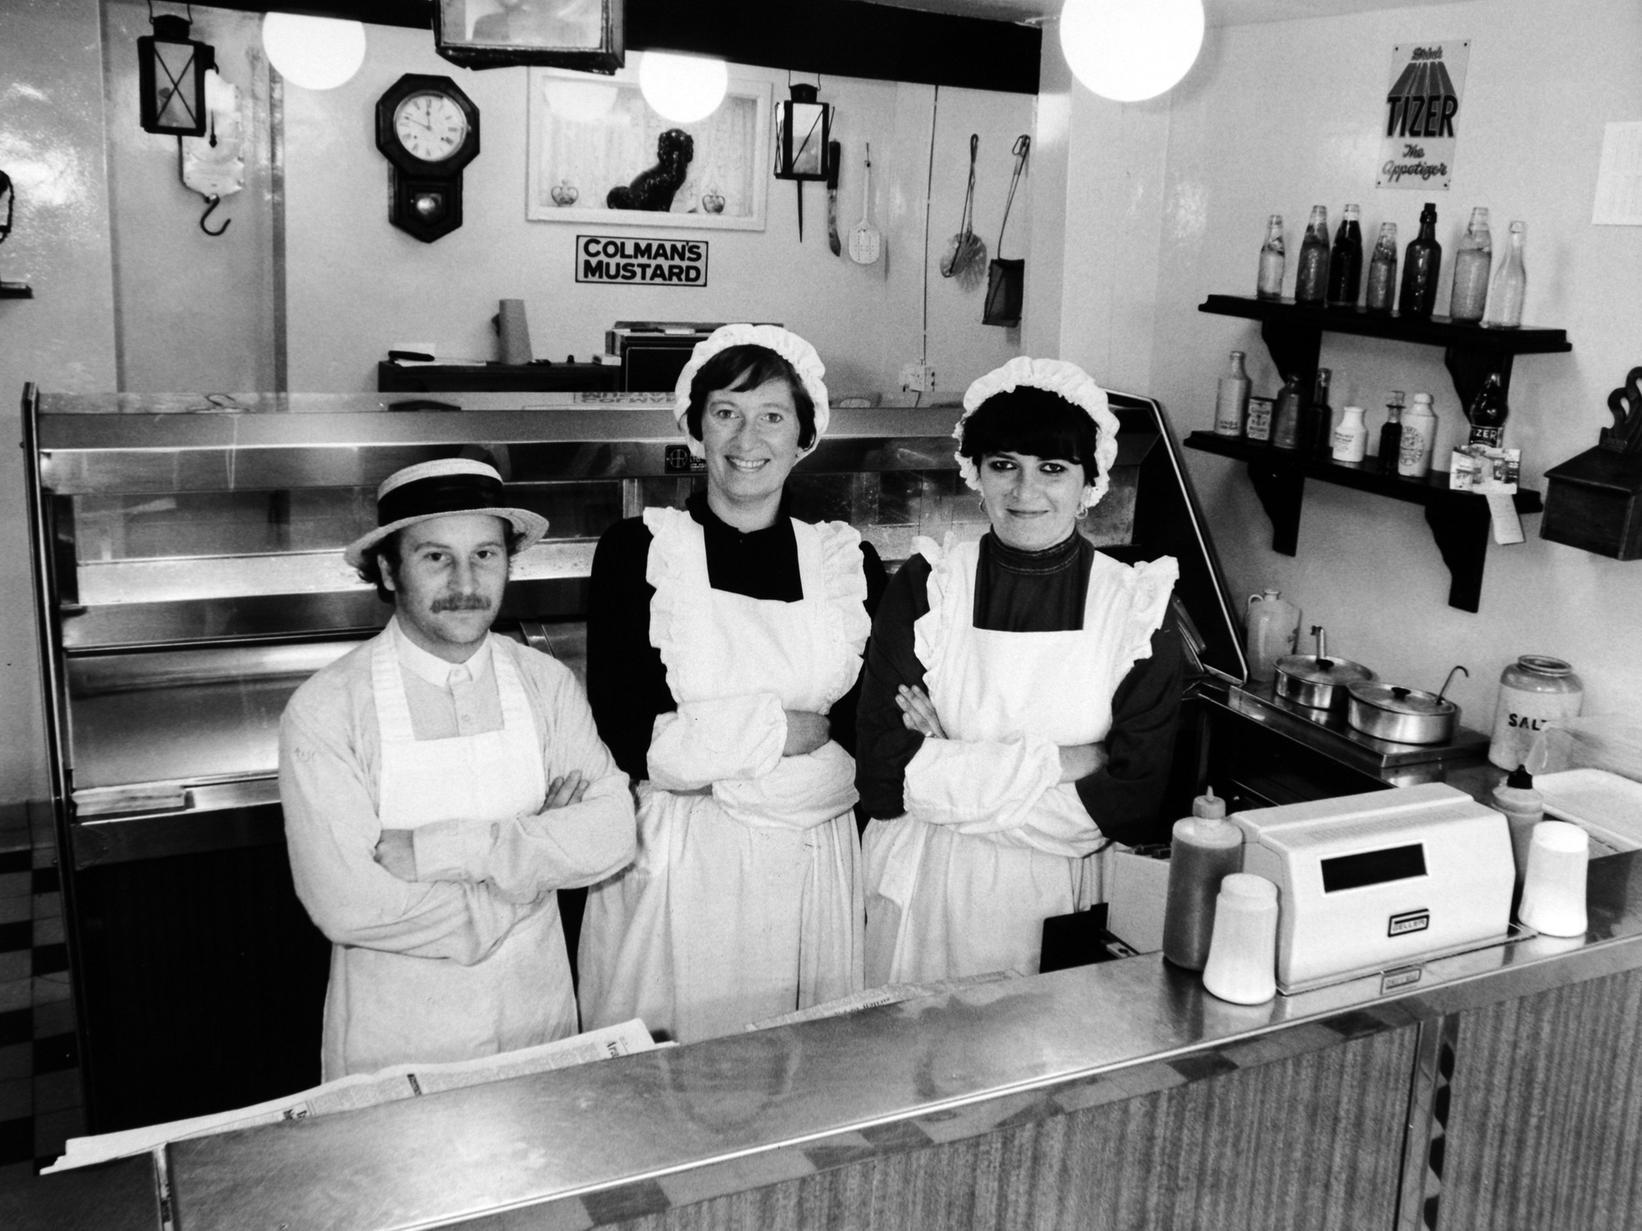 Remember Sandy Way fish shop in Leeds owned by Madeline Whitehead?